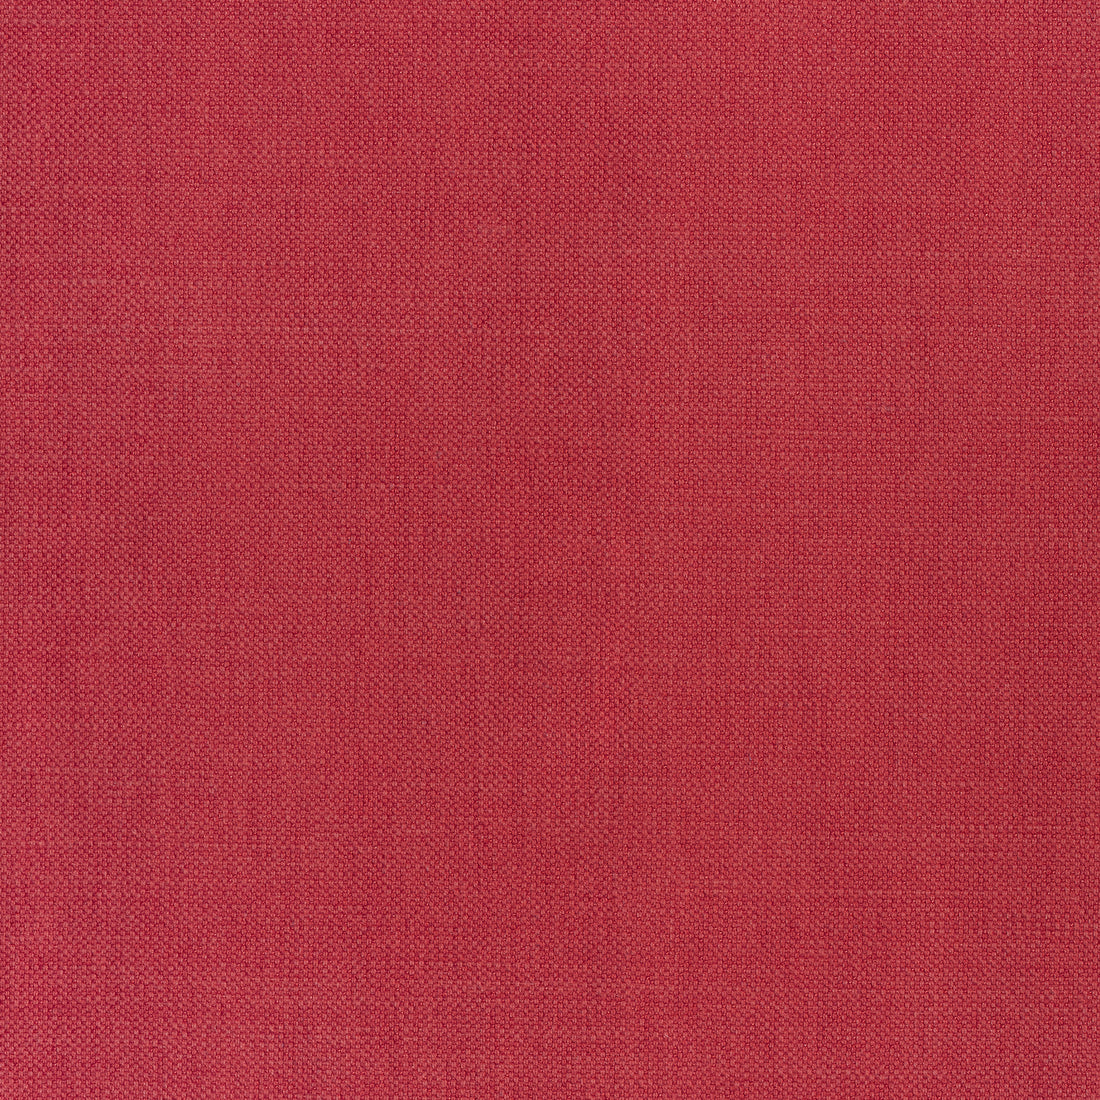 Prisma fabric in lipstick color - pattern number W70129 - by Thibaut in the Woven Resource Vol 12 Prisma Fabrics collection